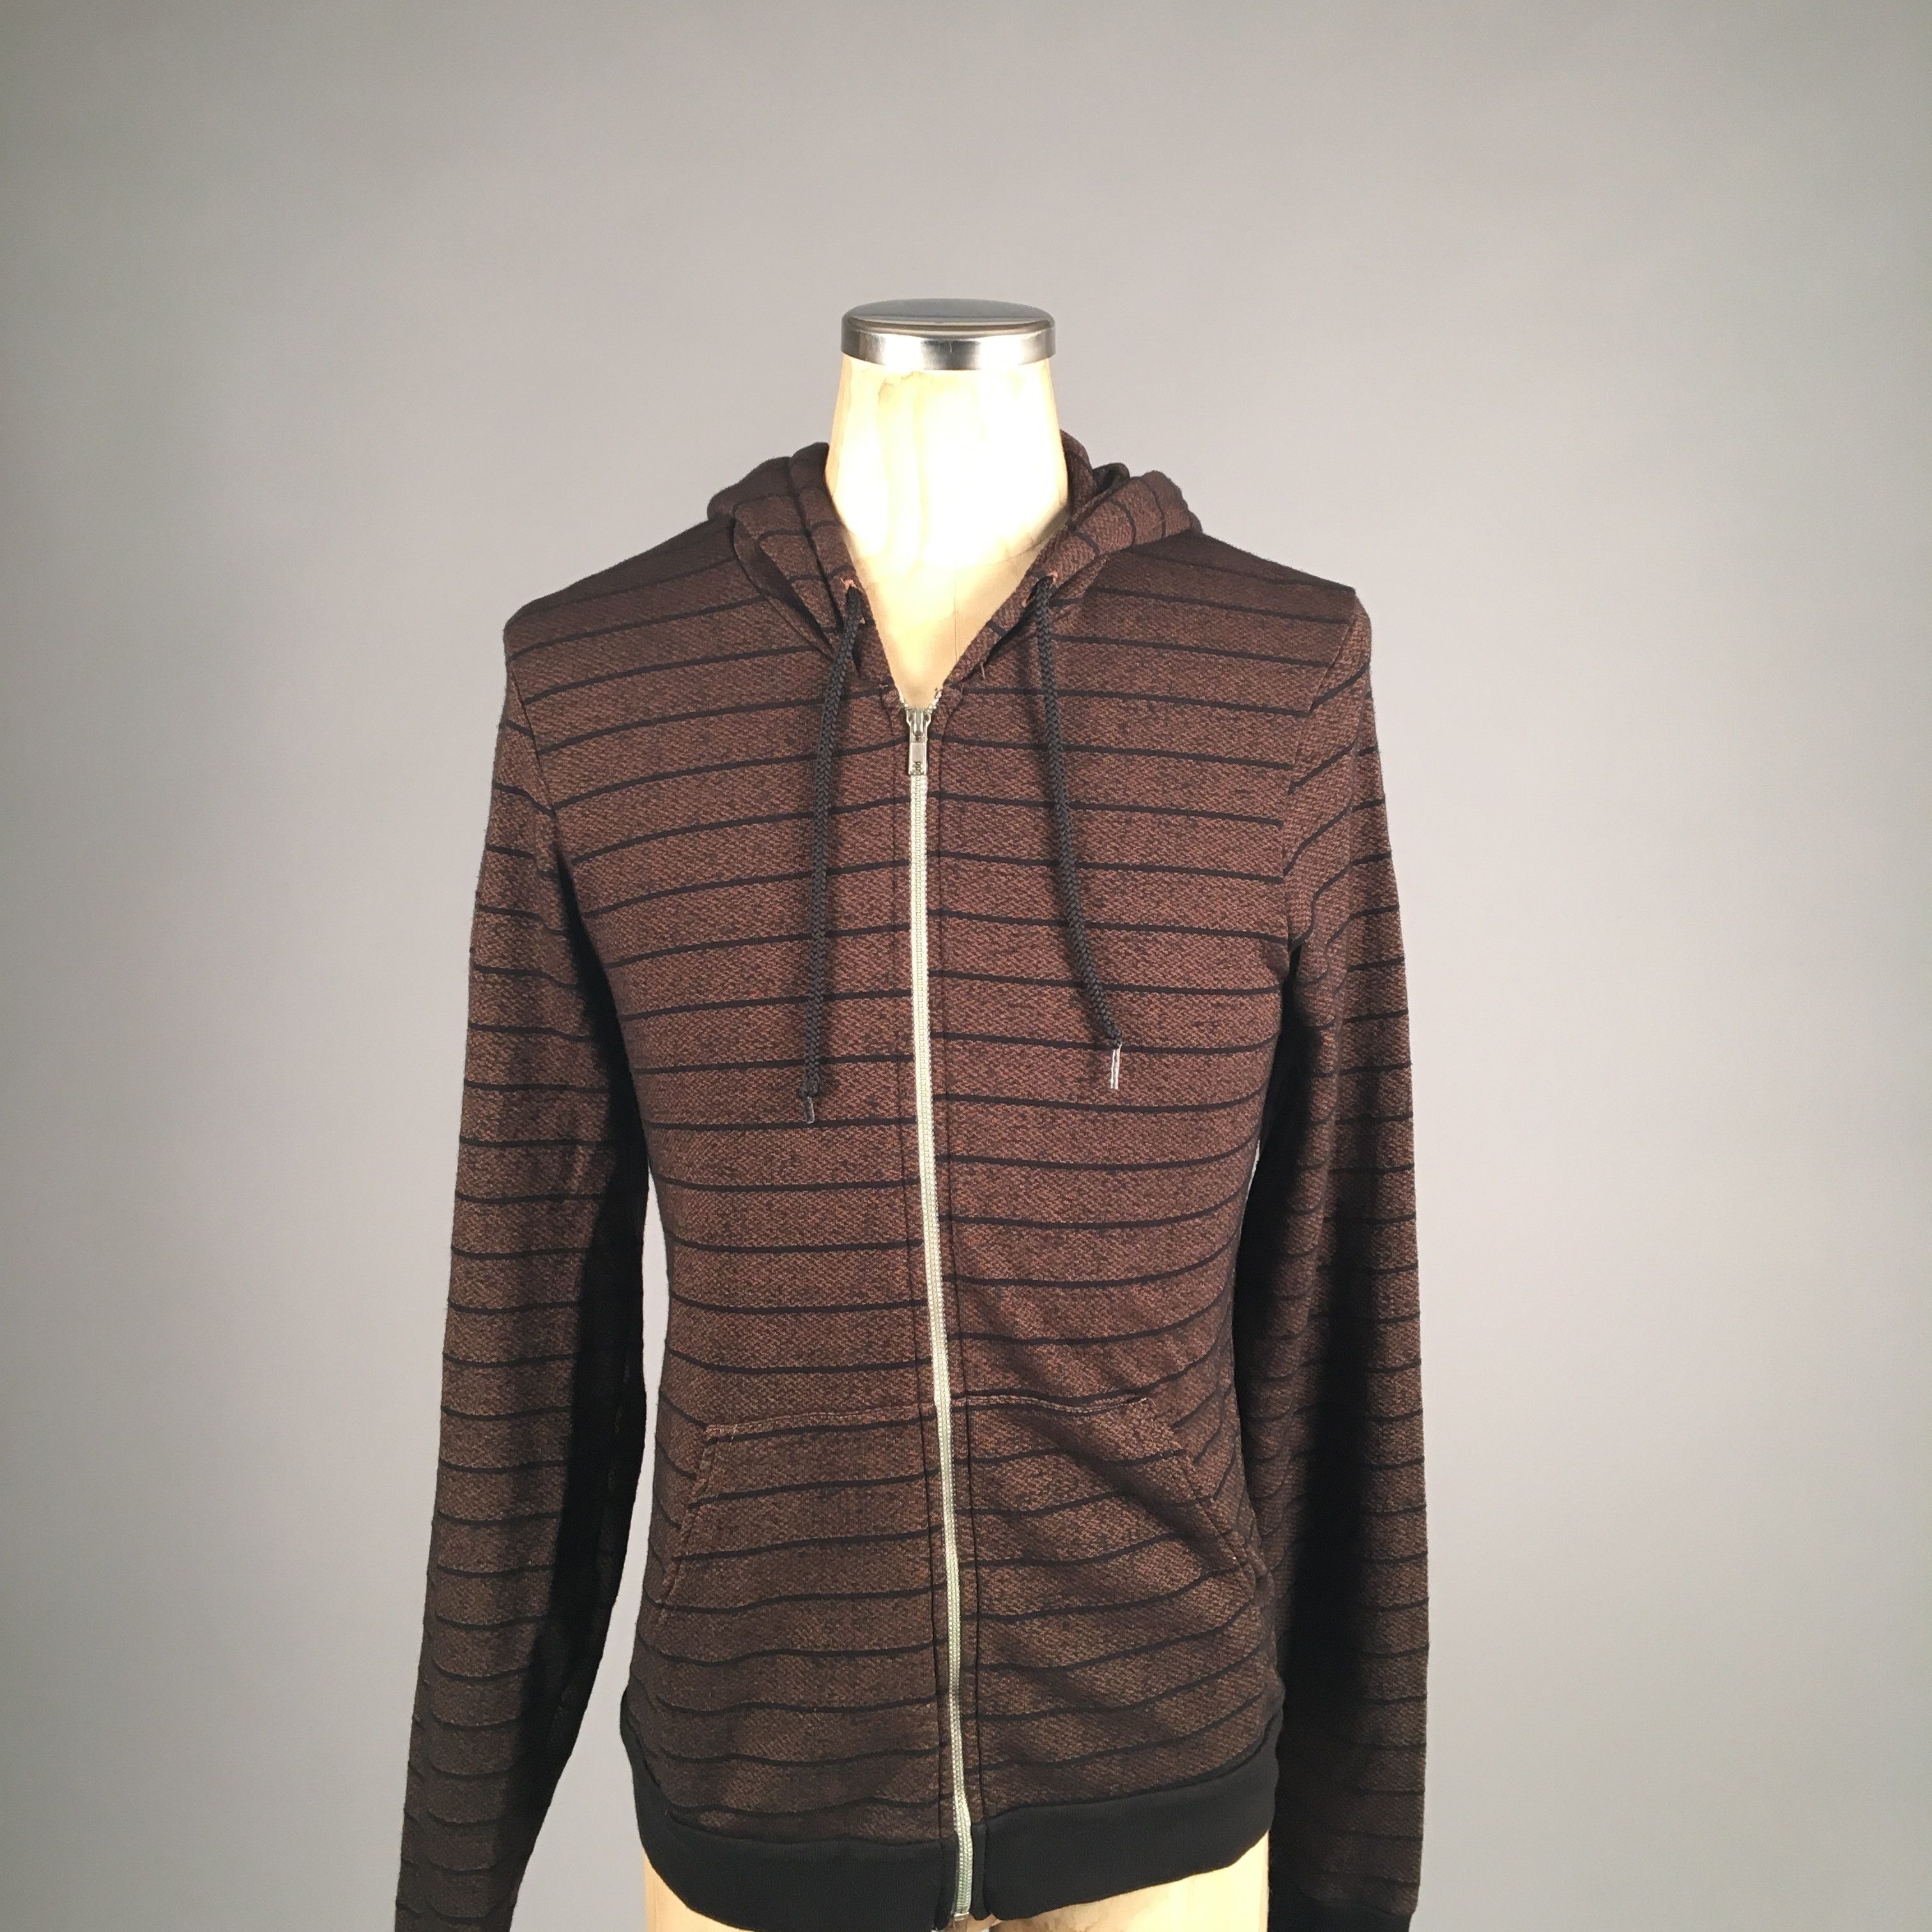 American Apparel BROWN STRIPED ZIP-UP HOODIE Size US M / EU 48-50 / 2 - 2 Preview